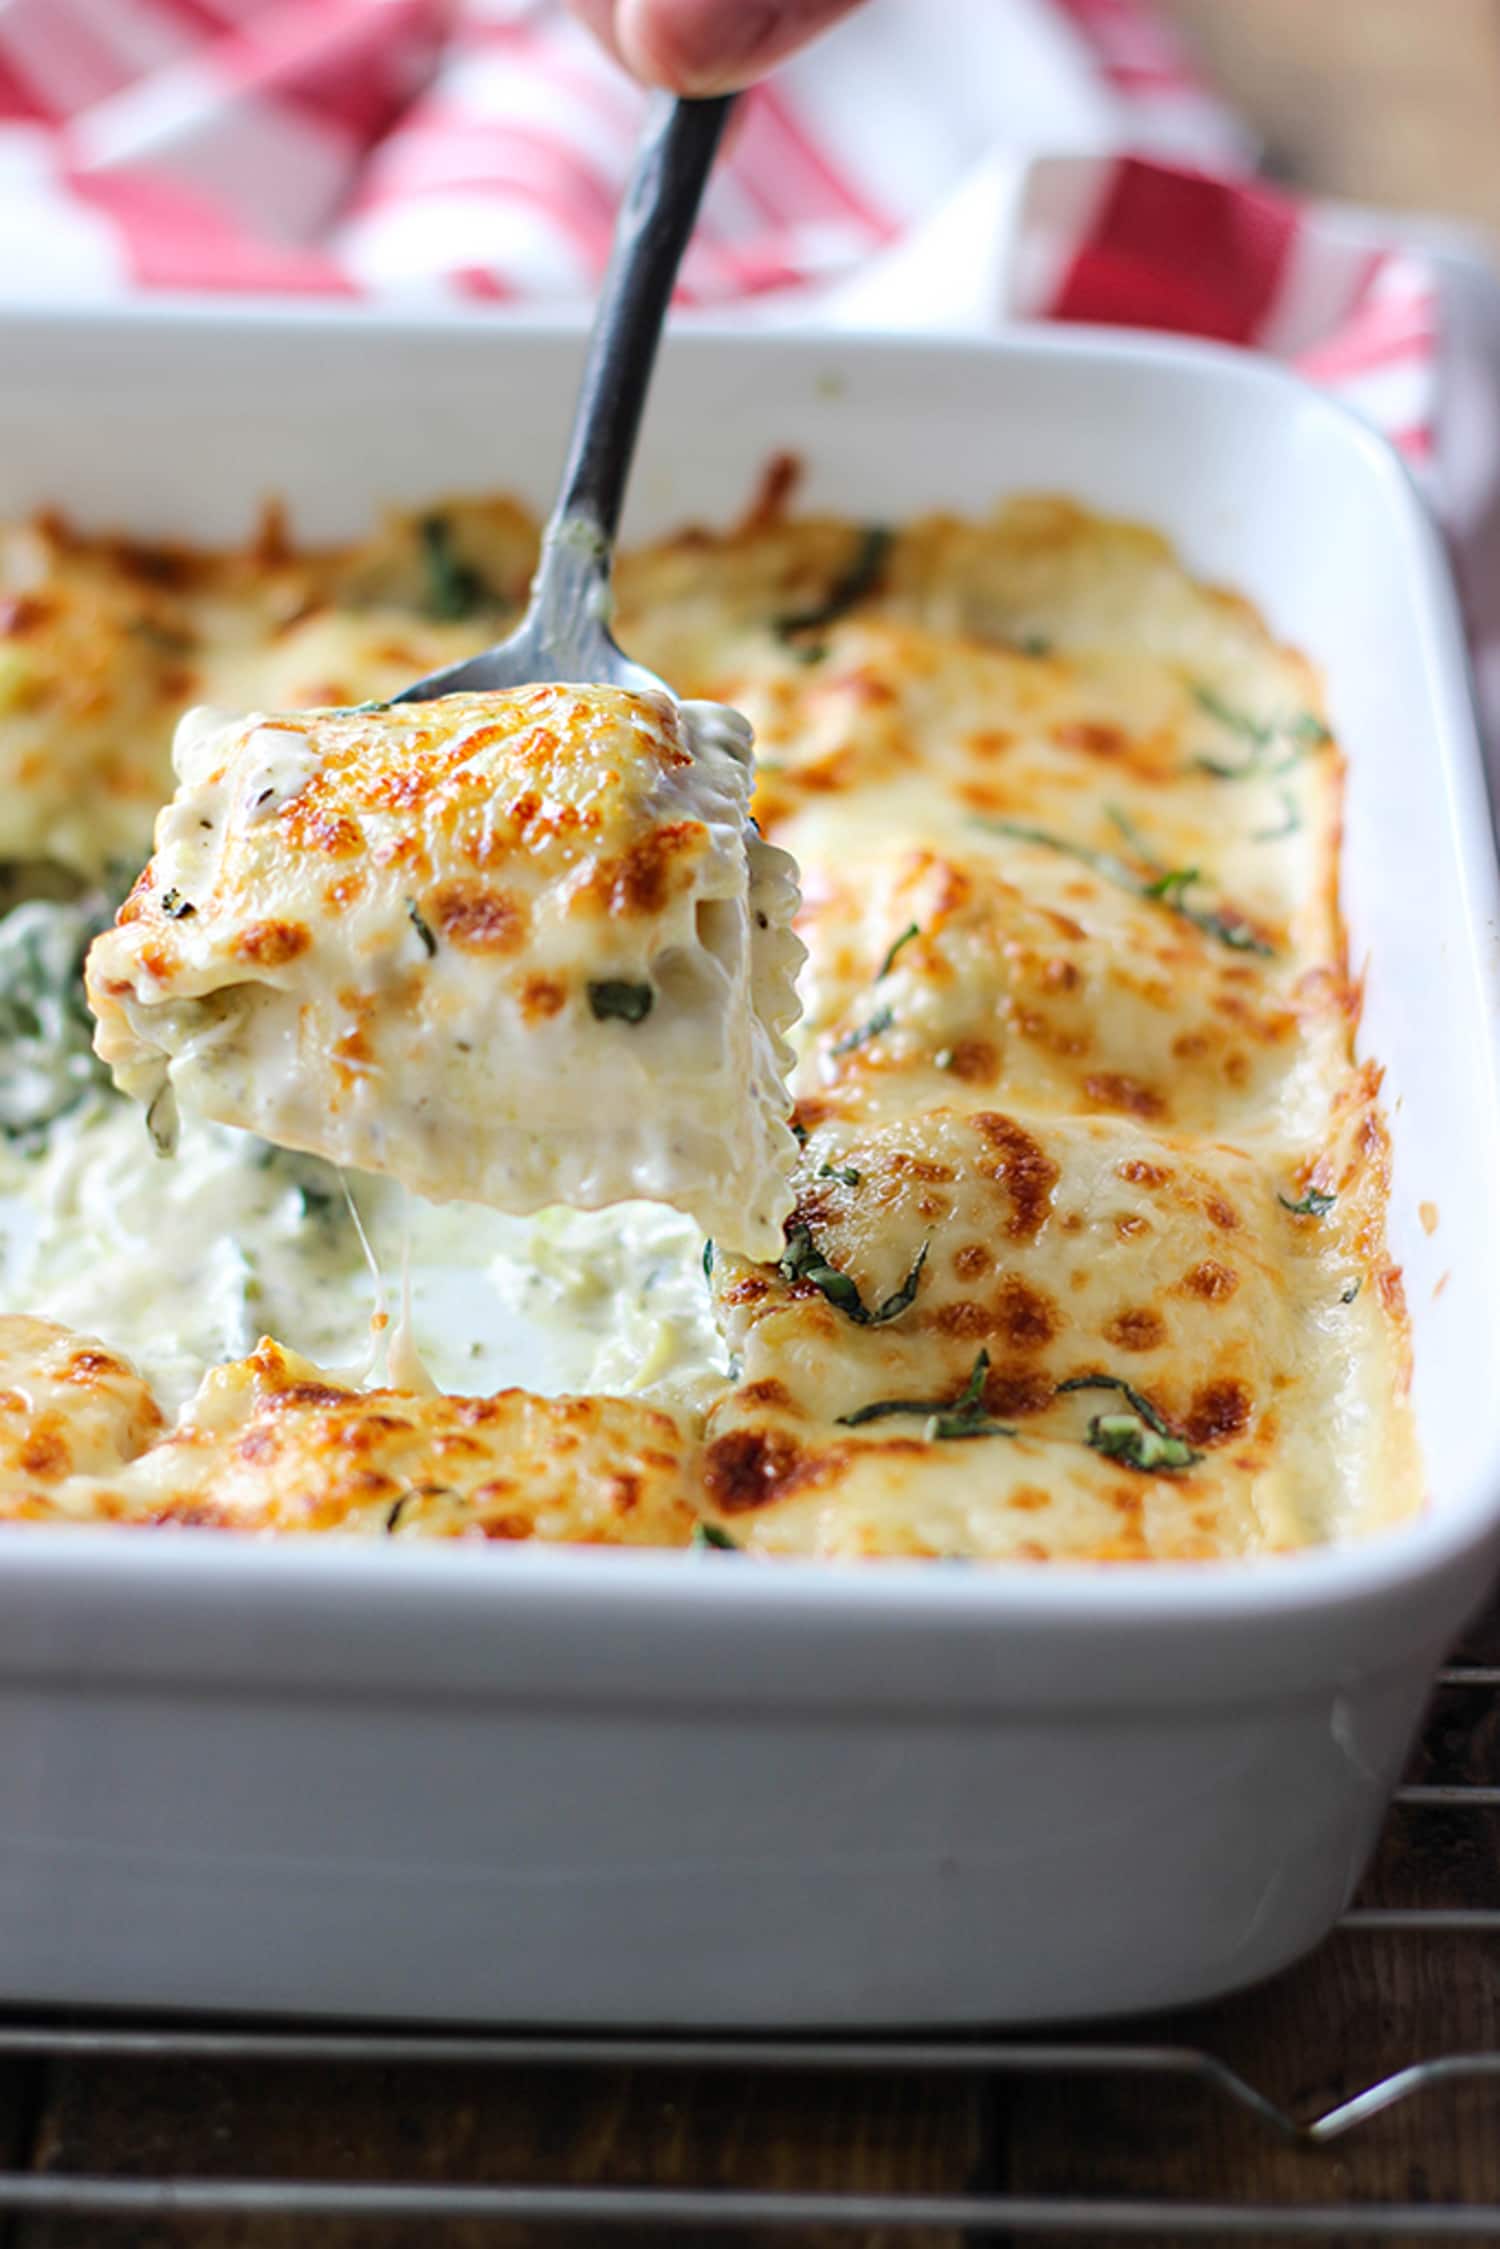 This Spinach and Artichoke Ravioli Bake Is a Cheesy Dream | Kitchn